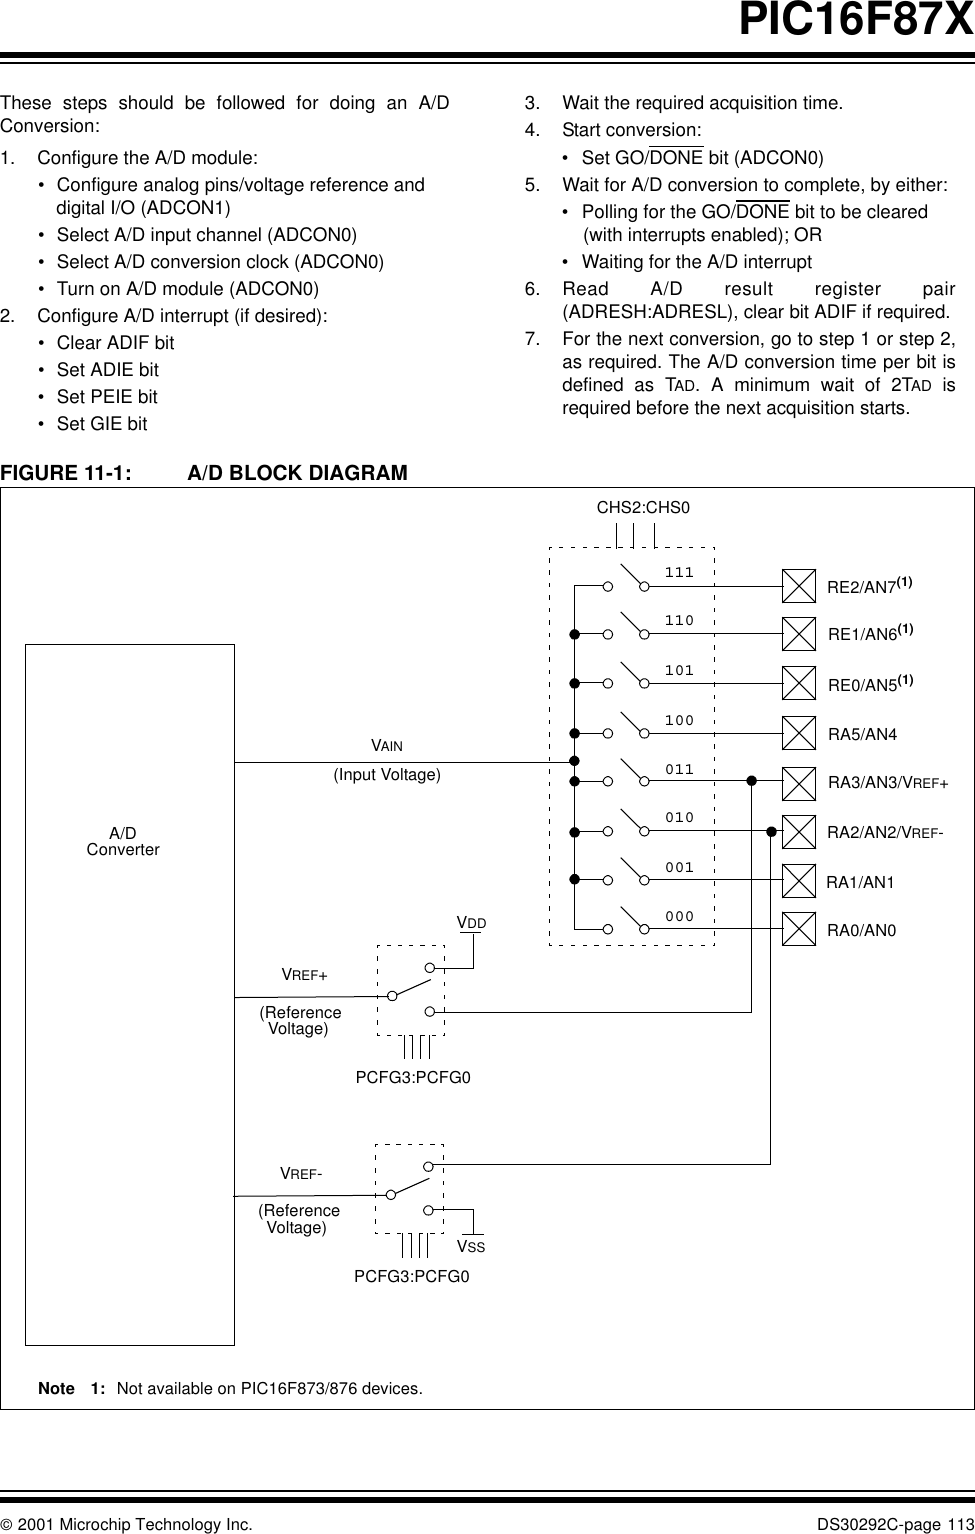  2001 Microchip Technology Inc. DS30292C-page 113PIC16F87XThese steps should be followed for doing an A/DConversion:1. Configure the A/D module:•Configure analog pins/voltage reference and digital I/O (ADCON1)•Select A/D input channel (ADCON0)•Select A/D conversion clock (ADCON0)•Turn on A/D module (ADCON0)2. Configure A/D interrupt (if desired):•Clear ADIF bit •Set ADIE bit•Set PEIE bit •Set GIE bit 3. Wait the required acquisition time.4. Start conversion:•Set GO/DONE bit (ADCON0)5. Wait for A/D conversion to complete, by either:•Polling for the GO/DONE bit to be cleared (with interrupts enabled); OR•Waiting for the A/D interrupt6. Read A/D result register pair(ADRESH:ADRESL), clear bit ADIF if required.7. For the next conversion, go to step 1 or step 2,as required. The A/D conversion time per bit isdefined as TAD. A minimum wait of 2TAD isrequired before the next acquisition starts.FIGURE 11-1: A/D BLOCK DIAGRAM        (Input Voltage)VAINVREF+(ReferenceVoltage)VDDPCFG3:PCFG0CHS2:CHS0RE2/AN7(1)RE1/AN6(1)RE0/AN5(1)RA5/AN4RA3/AN3/VREF+RA2/AN2/VREF-RA1/AN1RA0/AN0111110101100011010001000A/DConverterNote 1: Not available on PIC16F873/876 devices.VREF-(ReferenceVoltage) VSSPCFG3:PCFG0